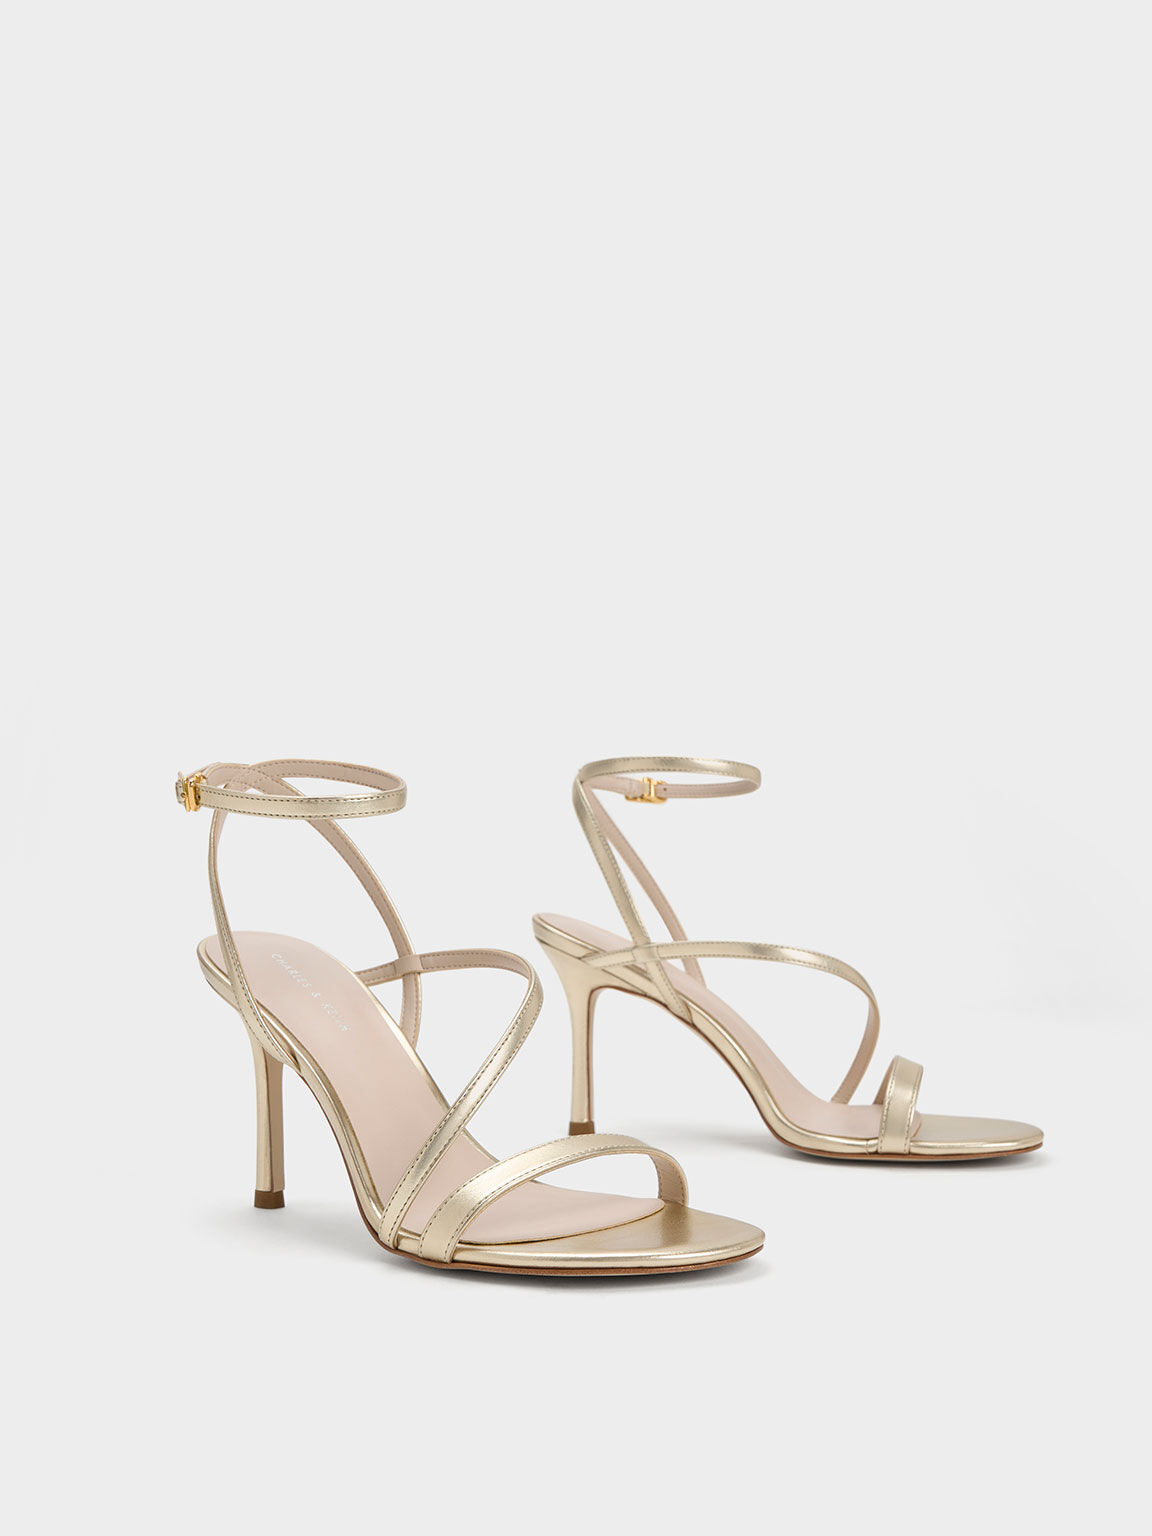 Buy Gold Heeled Sandals for Women by ELLE Online | Ajio.com